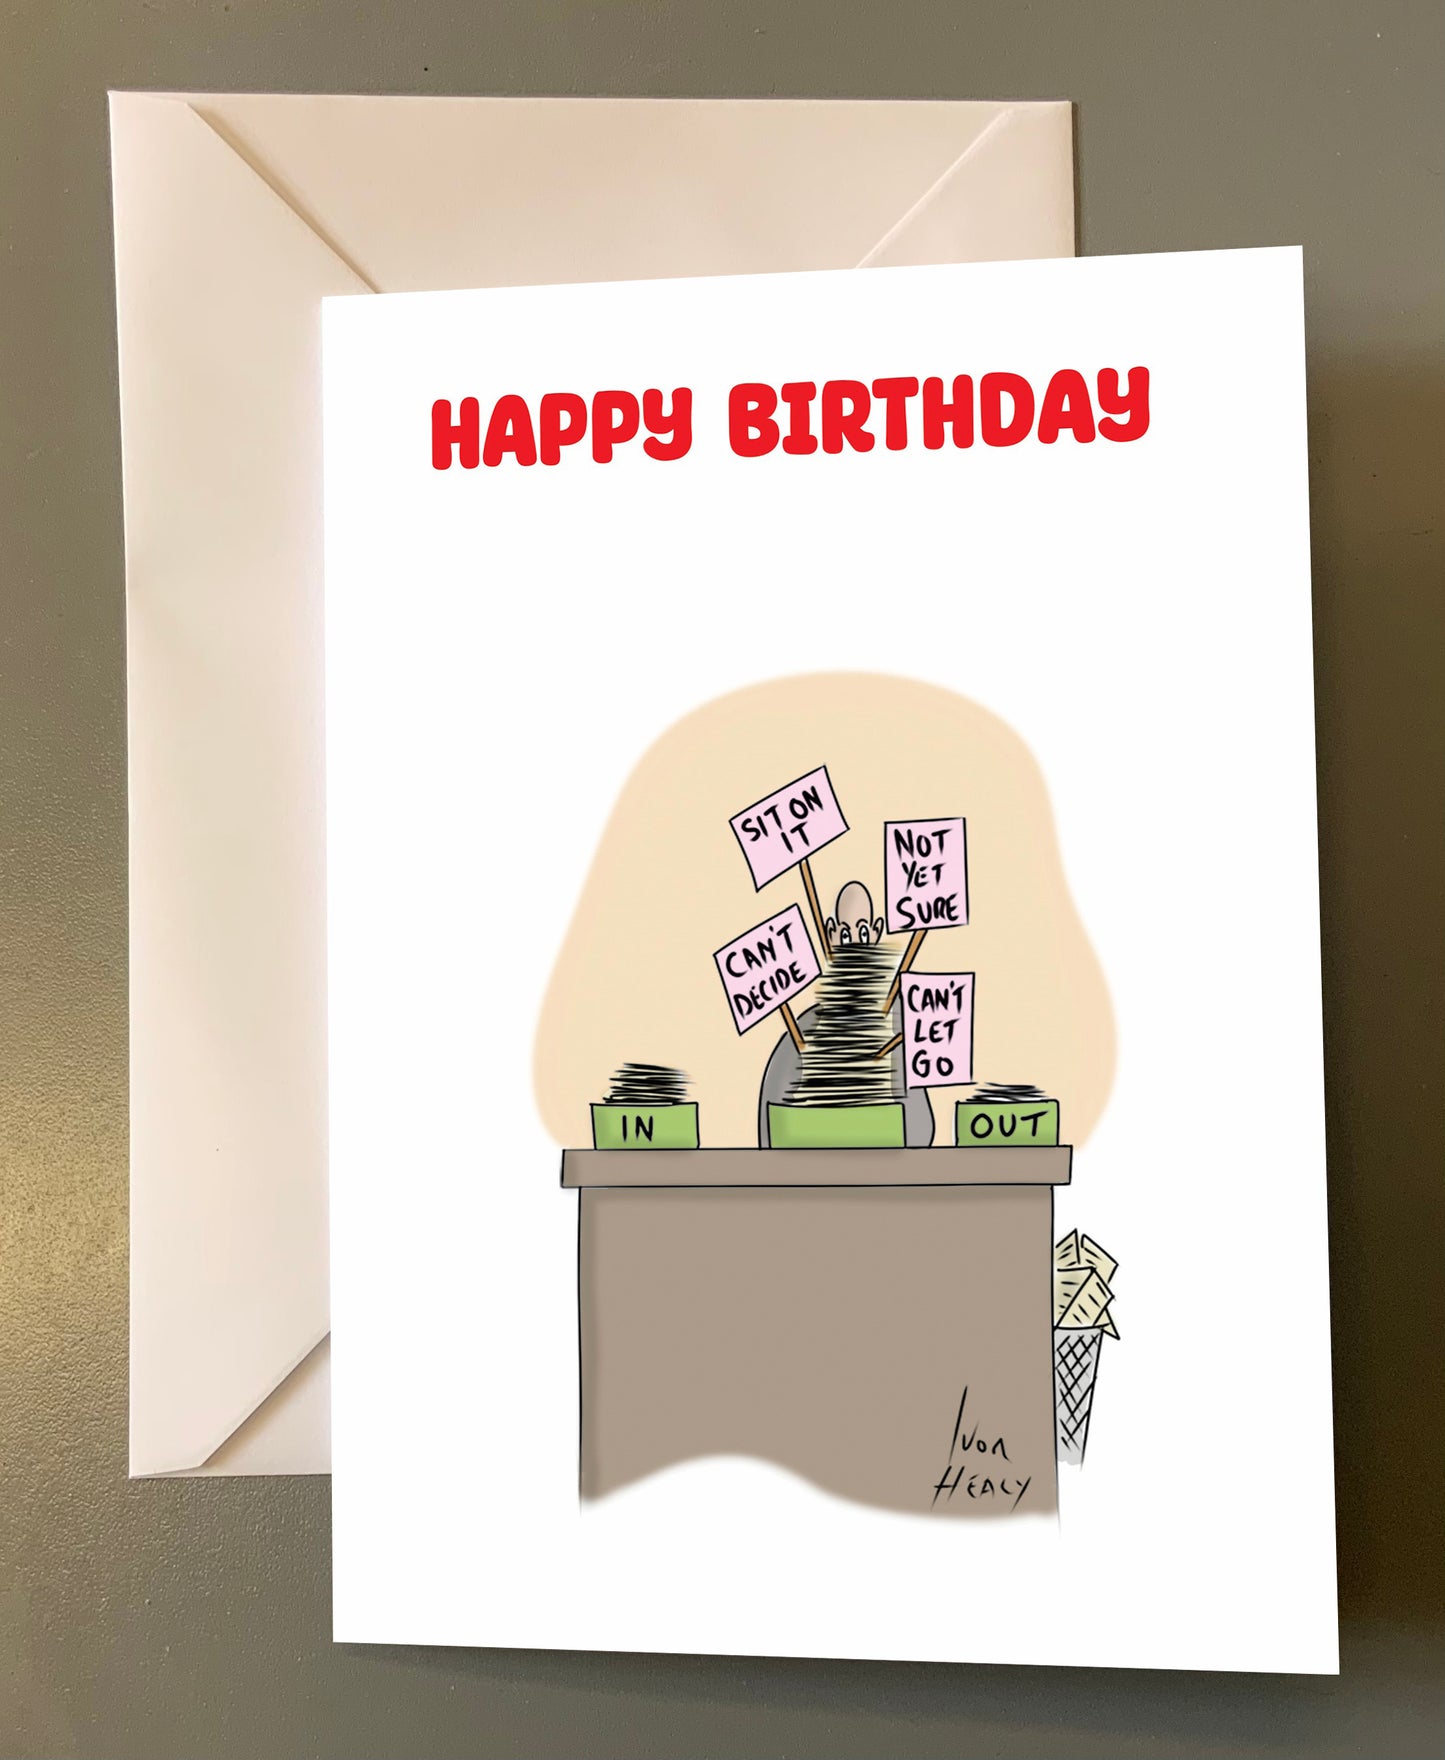 Can’t decide Birthday card